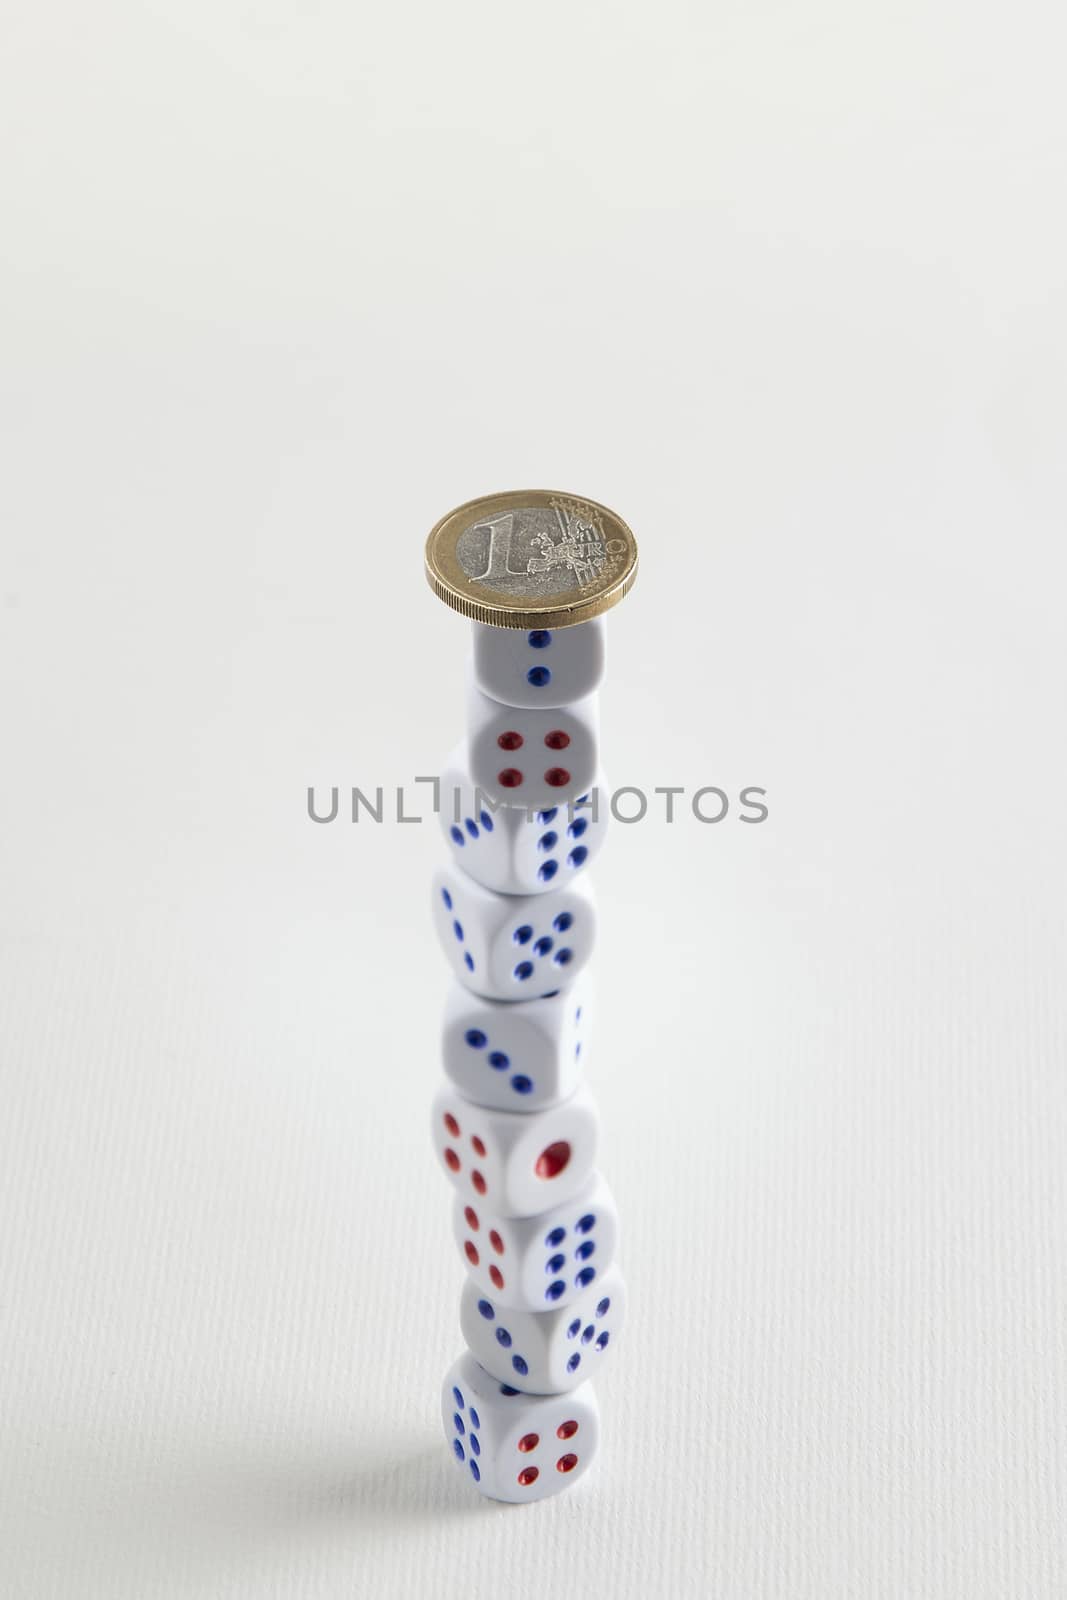 euro coin on dice stack